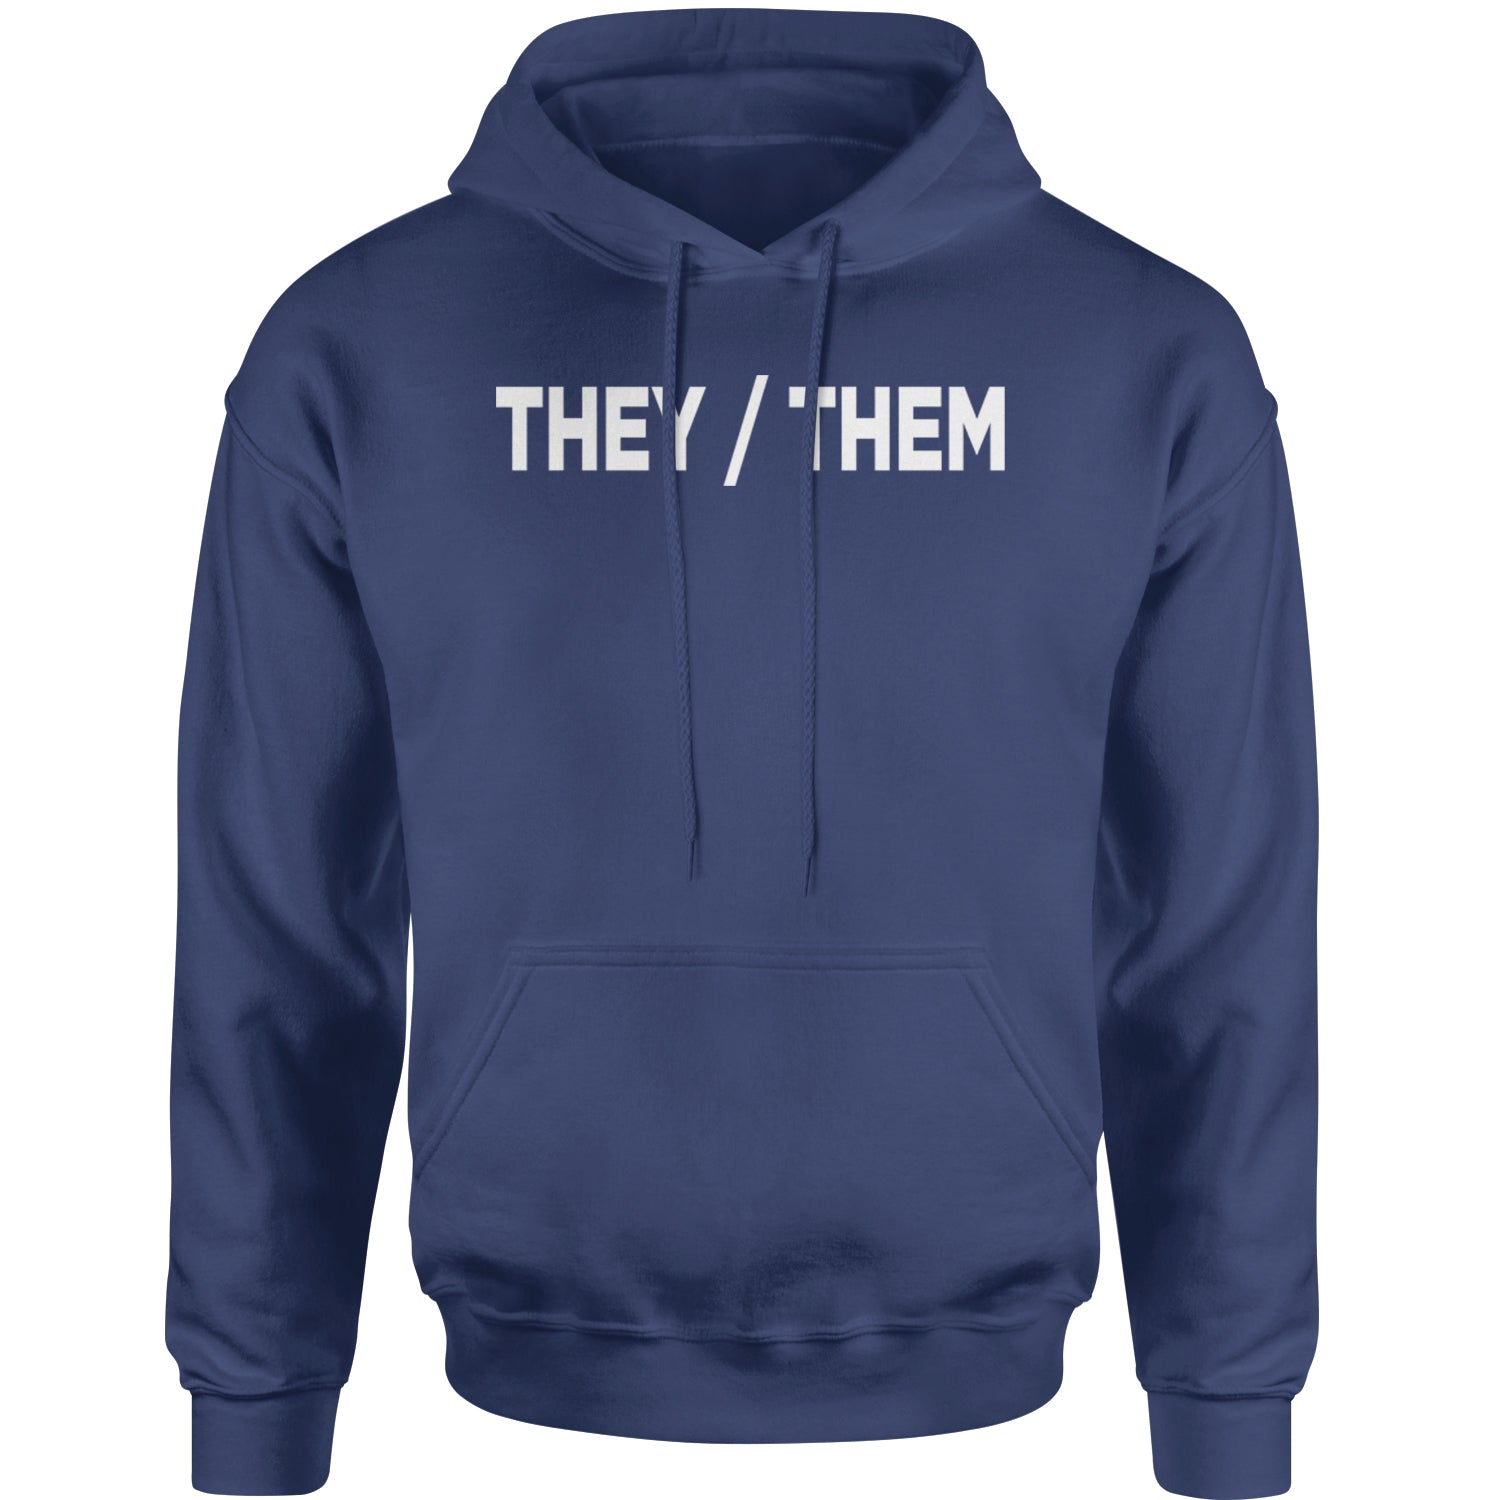 They Them Gender Pronouns Diversity and Inclusion Adult Hoodie Sweatshirt binary, civil, gay, he, her, him, nonbinary, pride, rights, she, them, they by Expression Tees